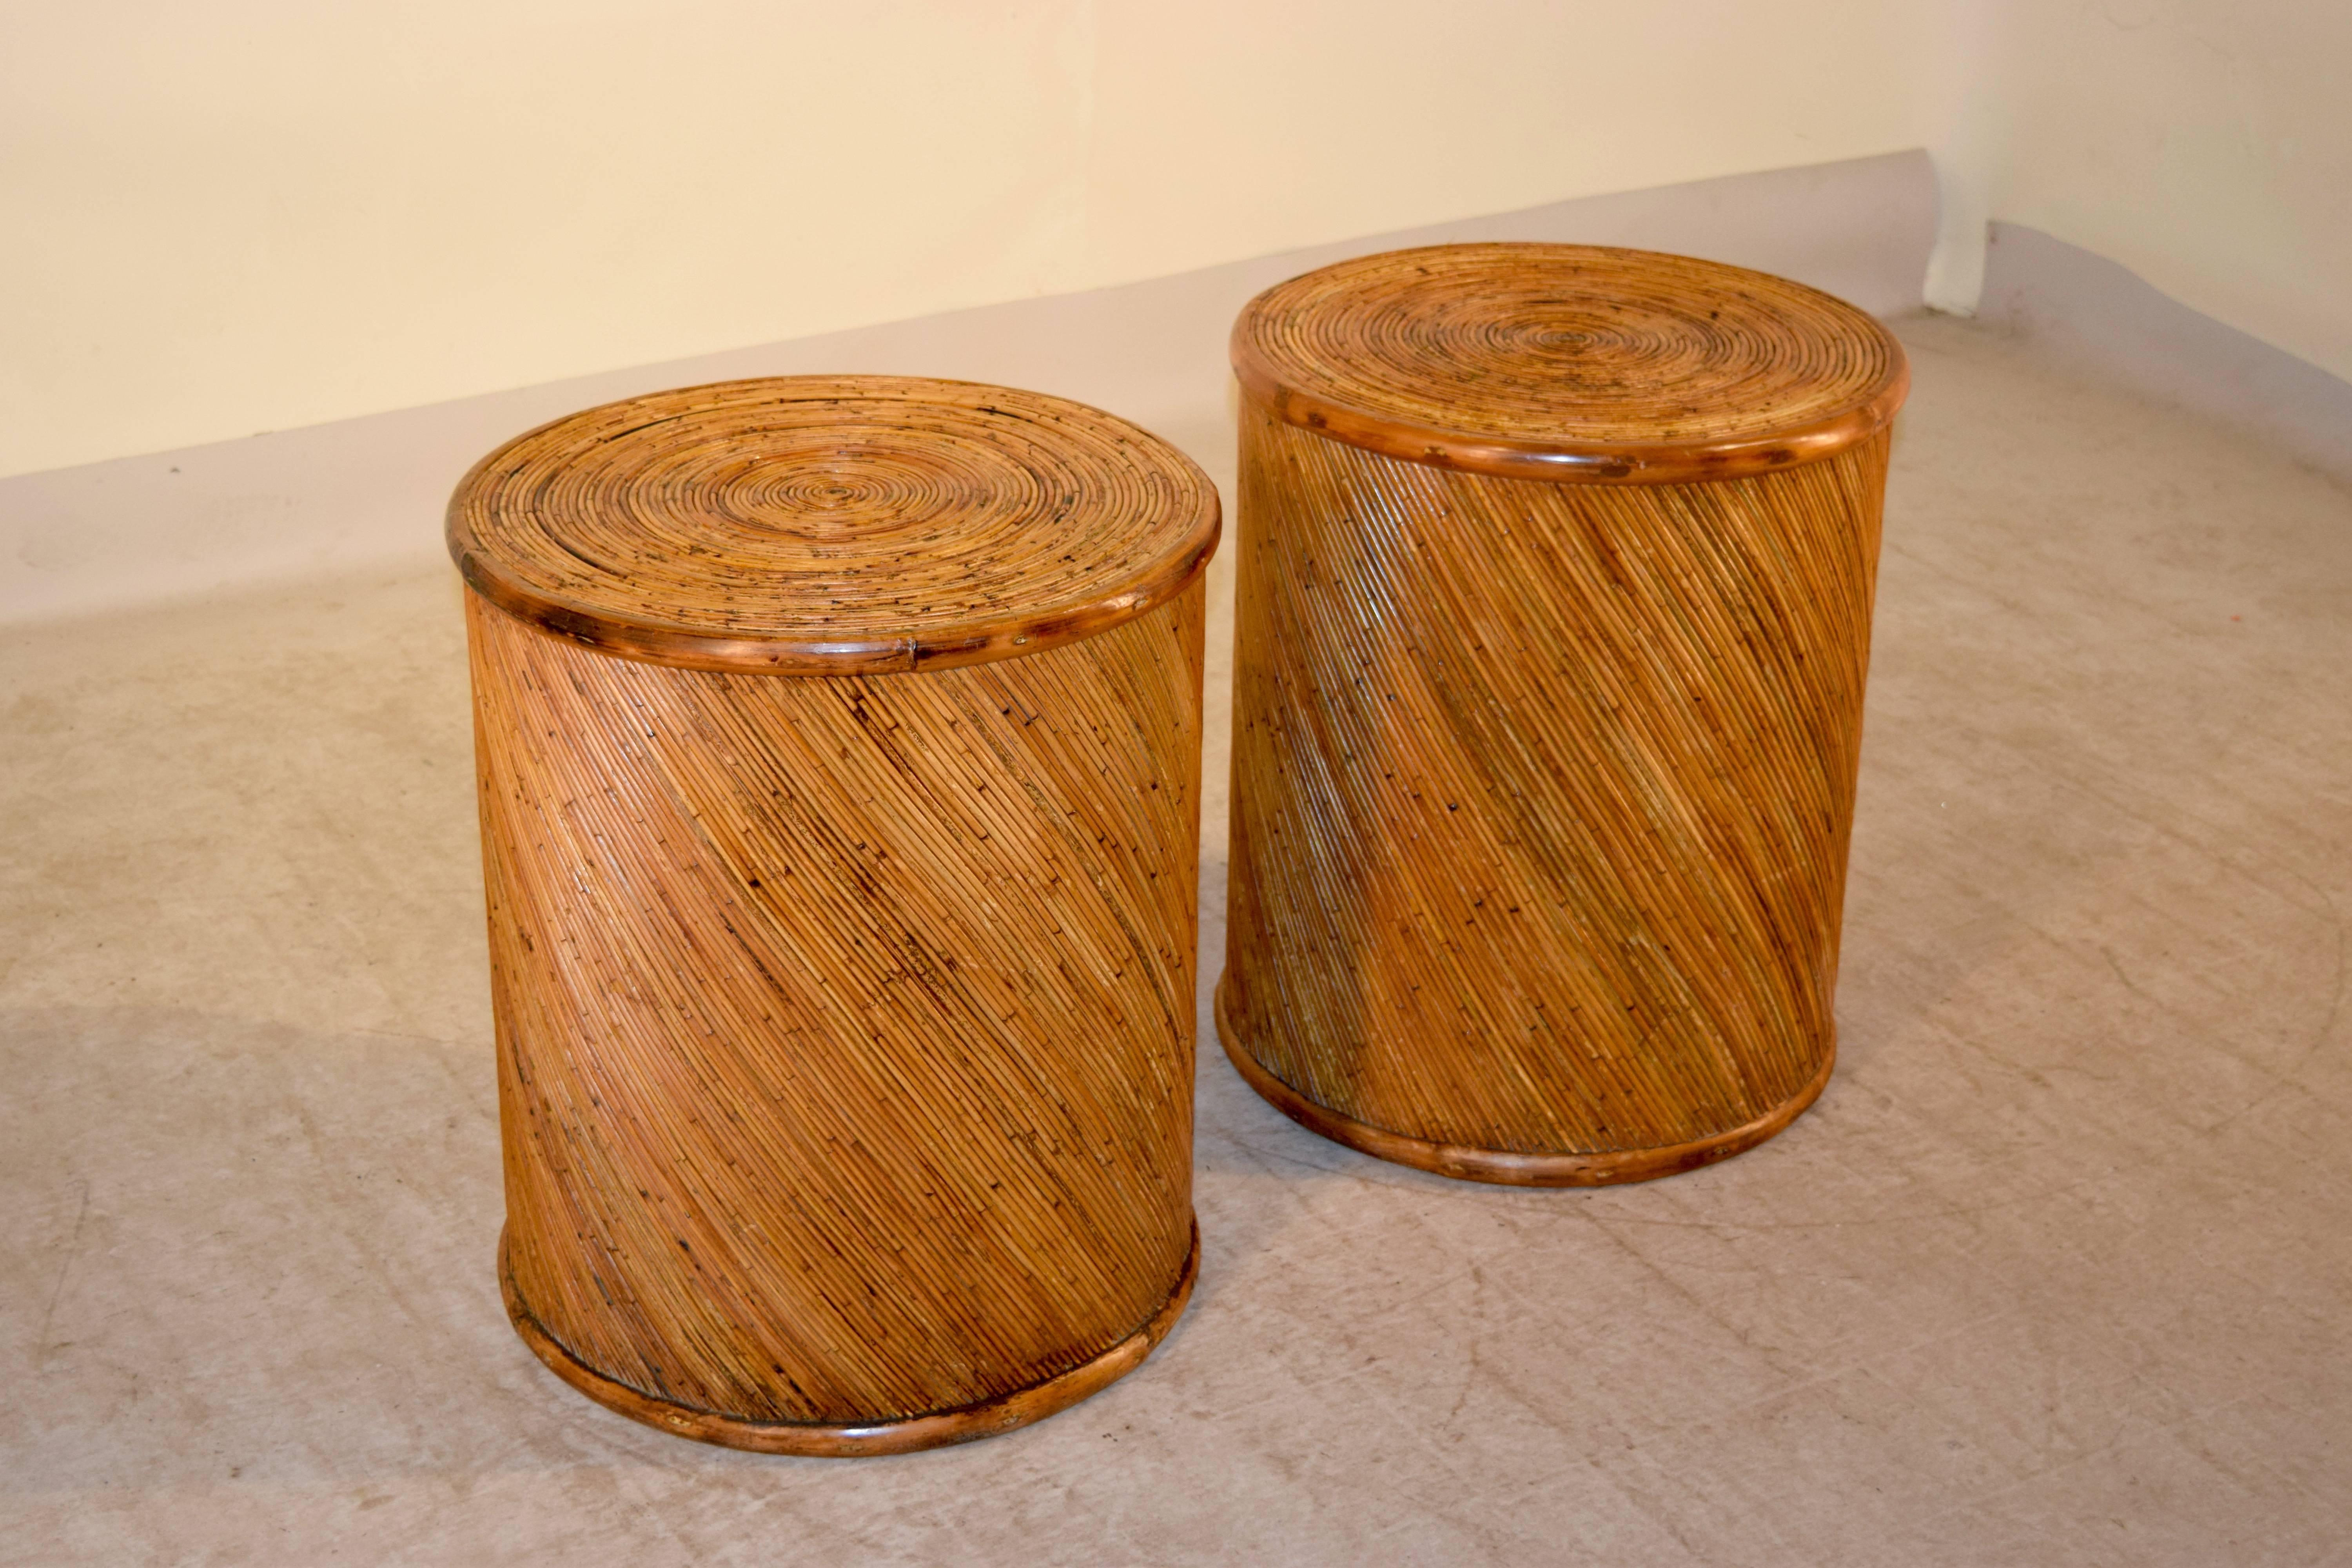 Pair of 1970s drum shaped bamboo side tables from France. The bamboo is applied in a diagonal pattern on the sides and in a circular pattern on the top.